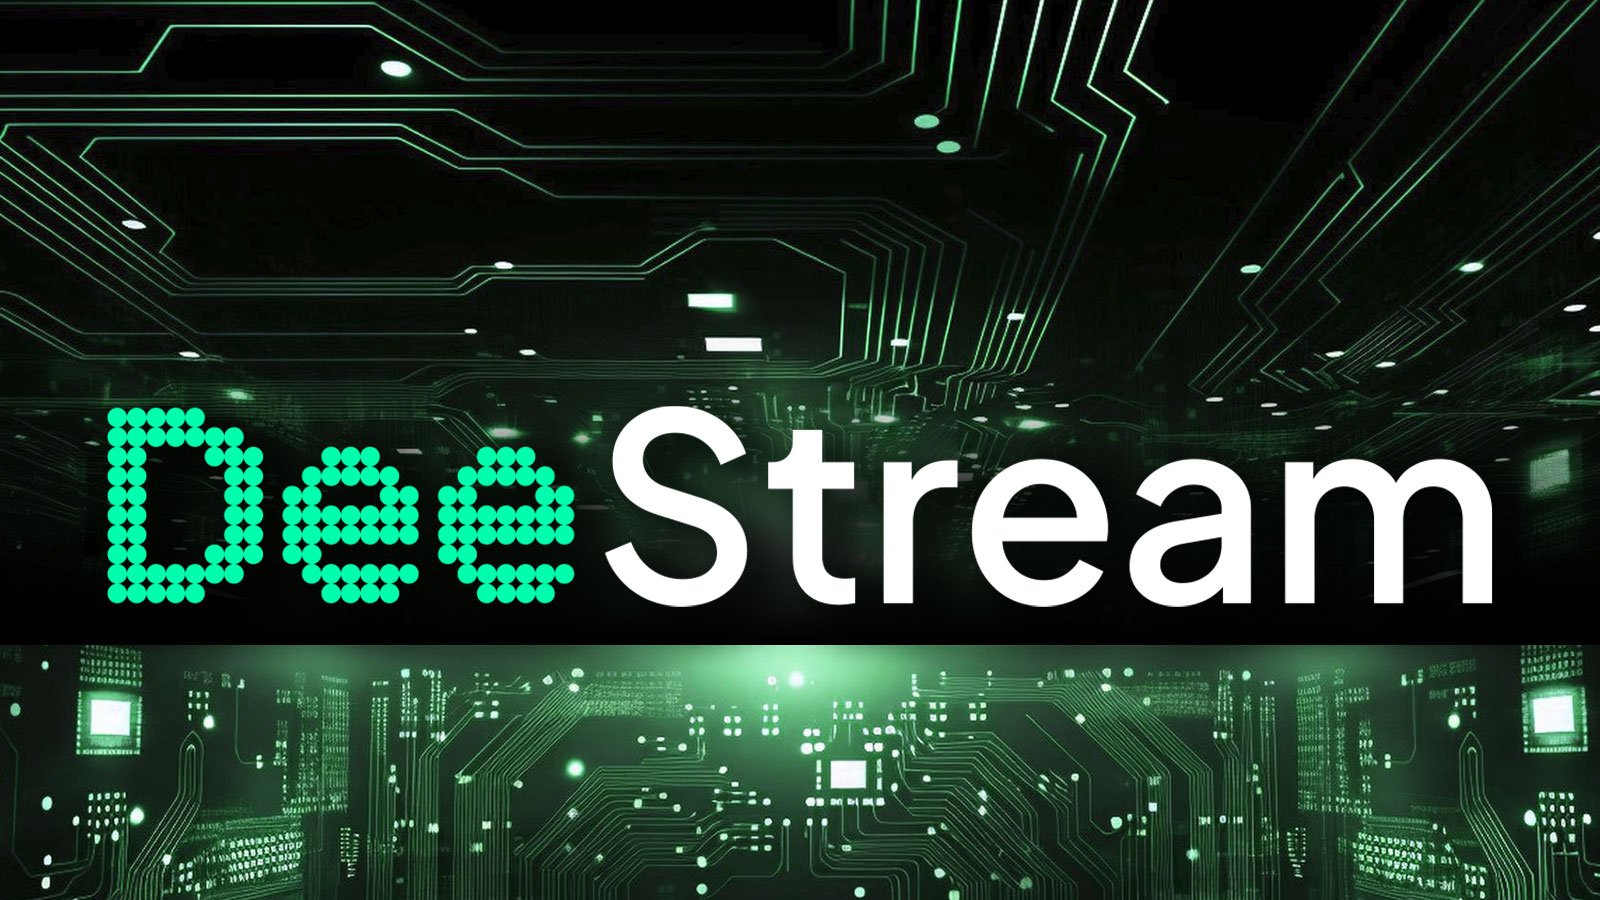 DeeStream (DST) Asset Release Spotlighted This March, as Polkadot (DOT), Binance Coin (BNB) Top Altcoins Soaring